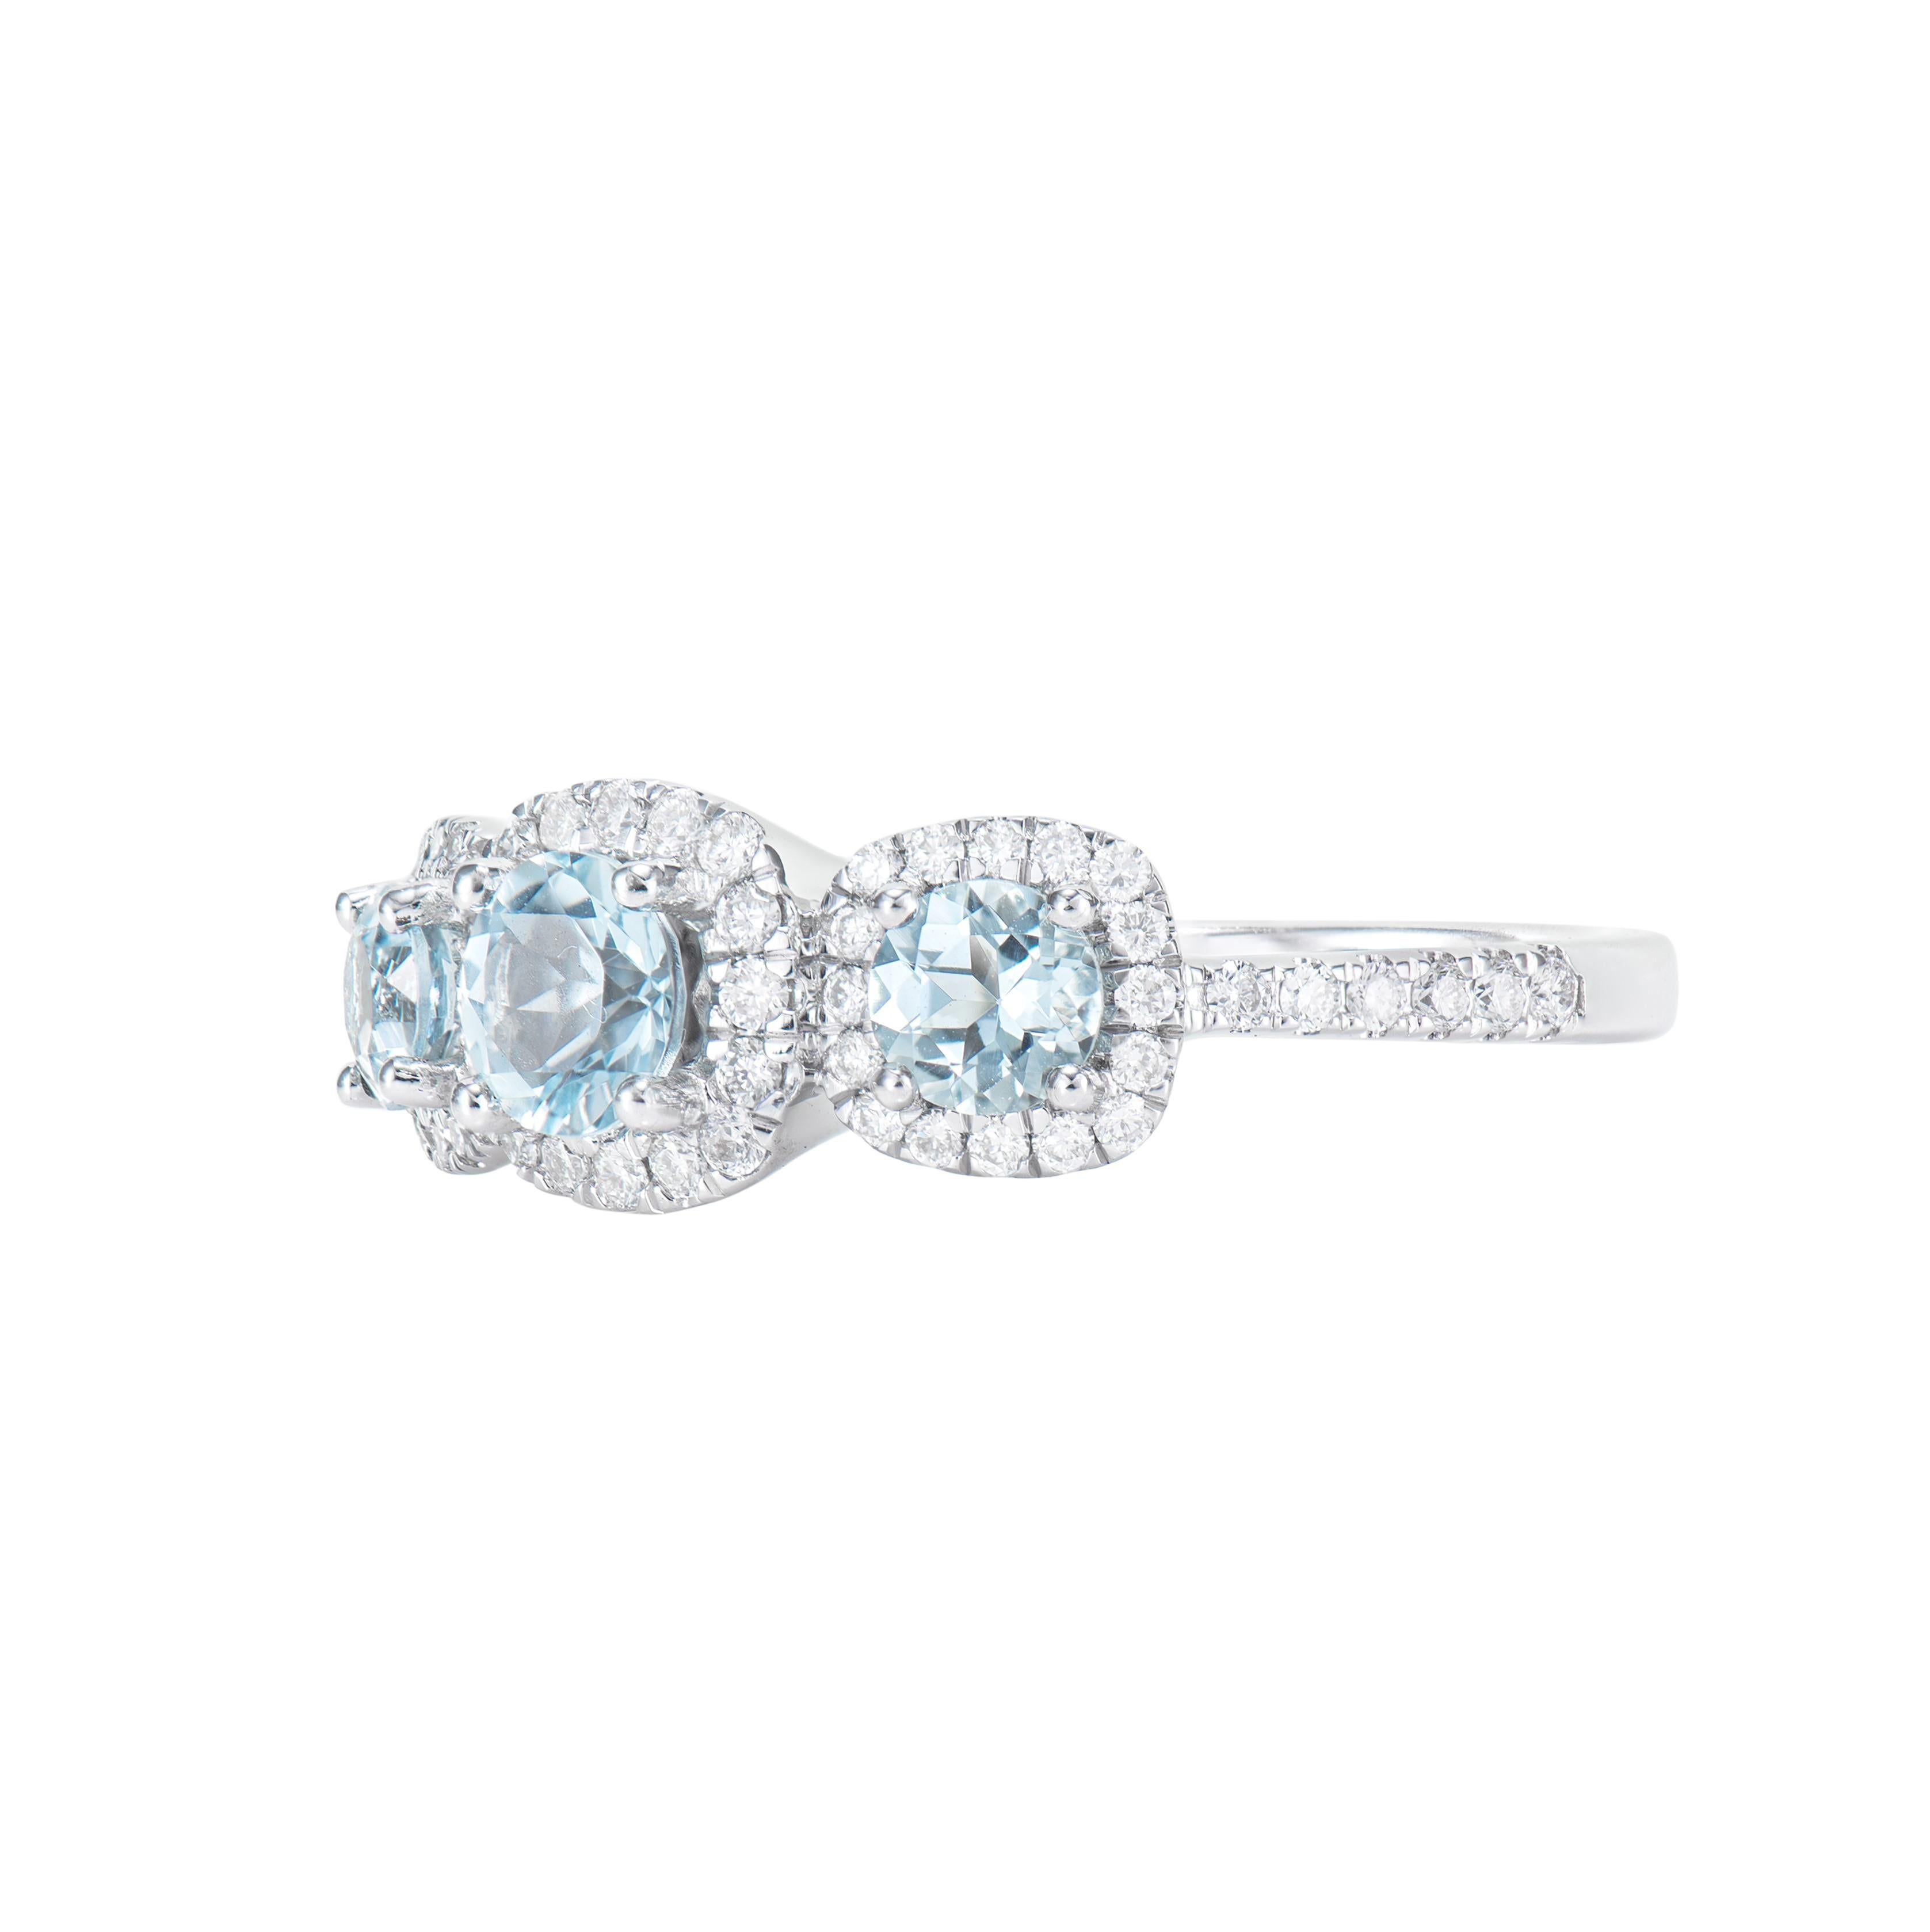 Round Cut 0.89 Carat Three Stone Aquamarine Solitaire Ring in 14KWG with White Diamond. For Sale